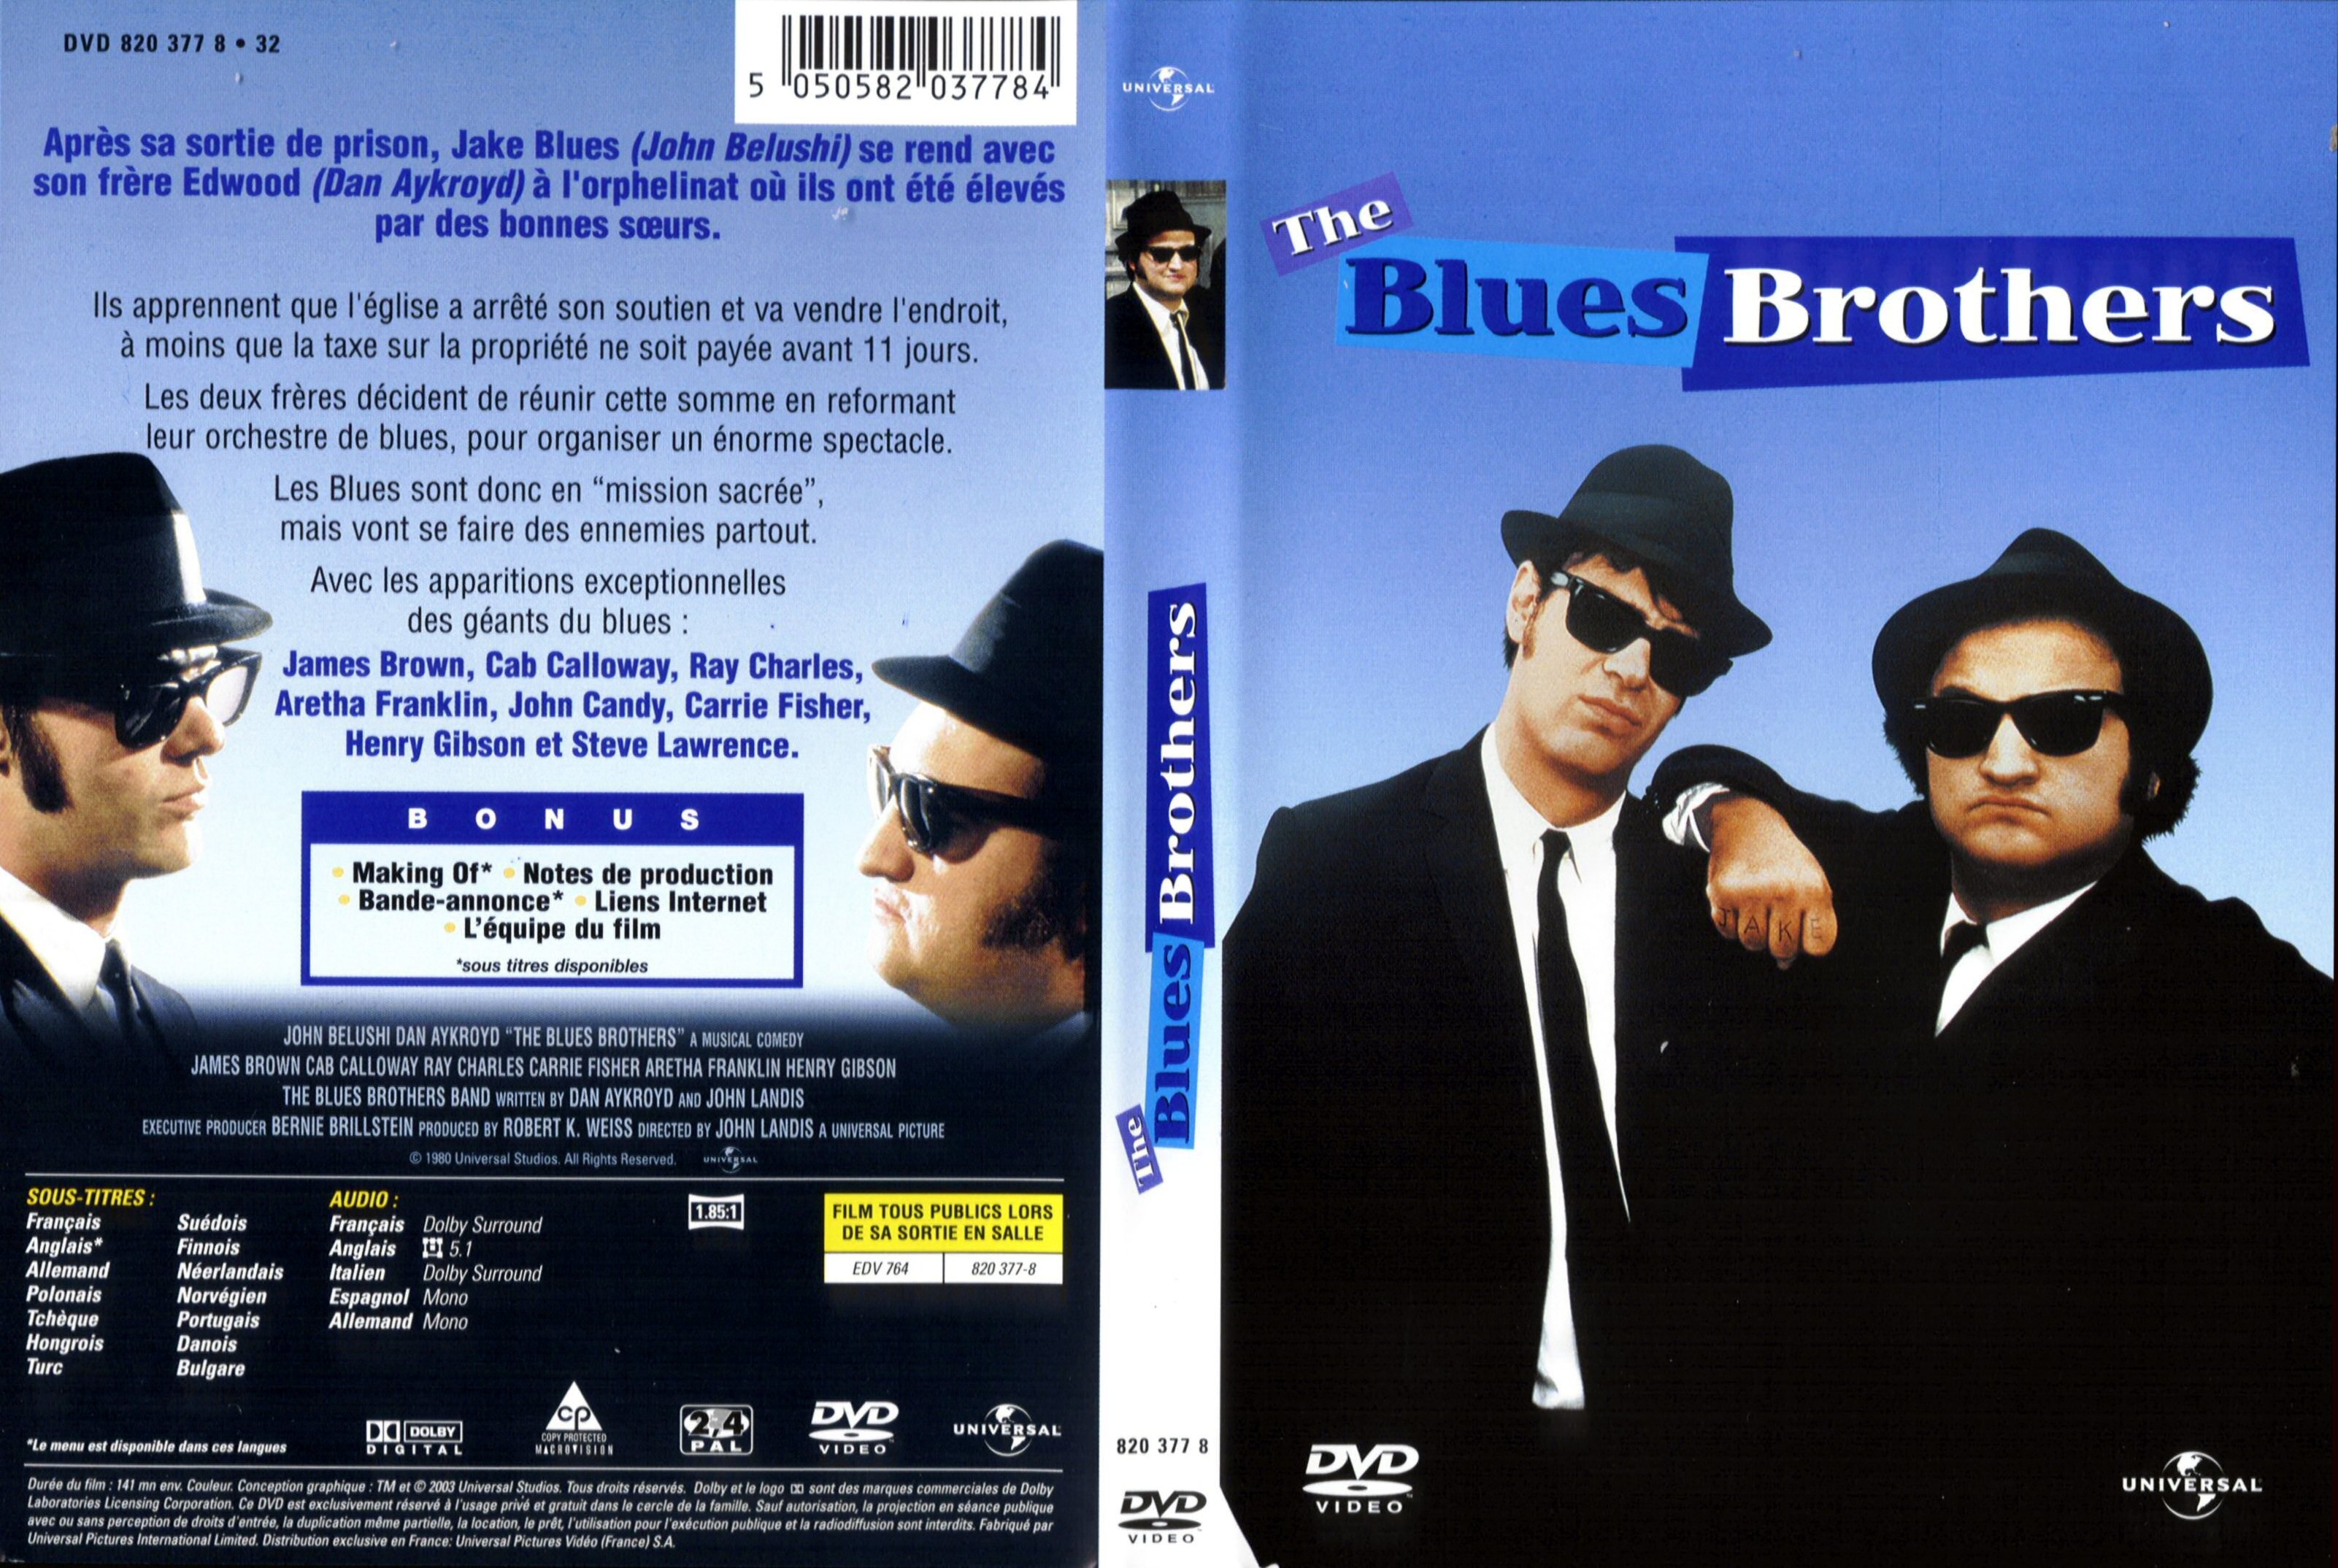 Jaquette DVD The Blues Brothers v2